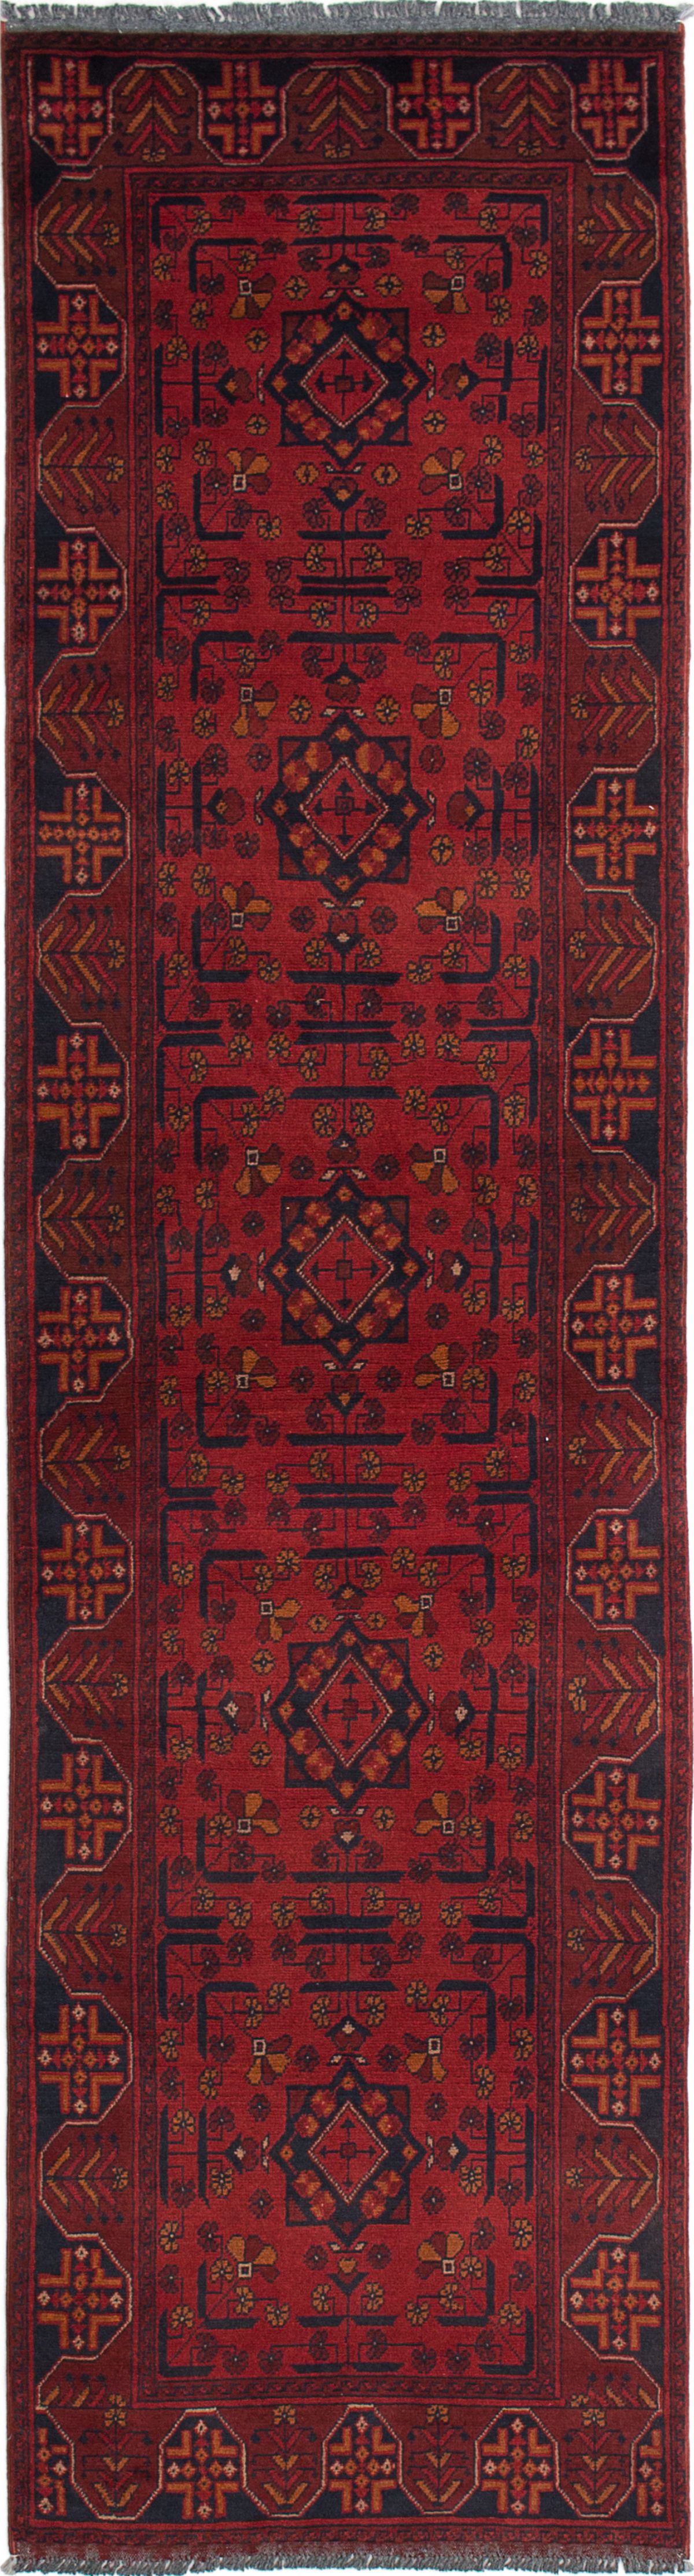 Hand-knotted Finest Khal Mohammadi Red Wool Rug 2'5" x 9'7"  Size: 2'5" x 9'7"  